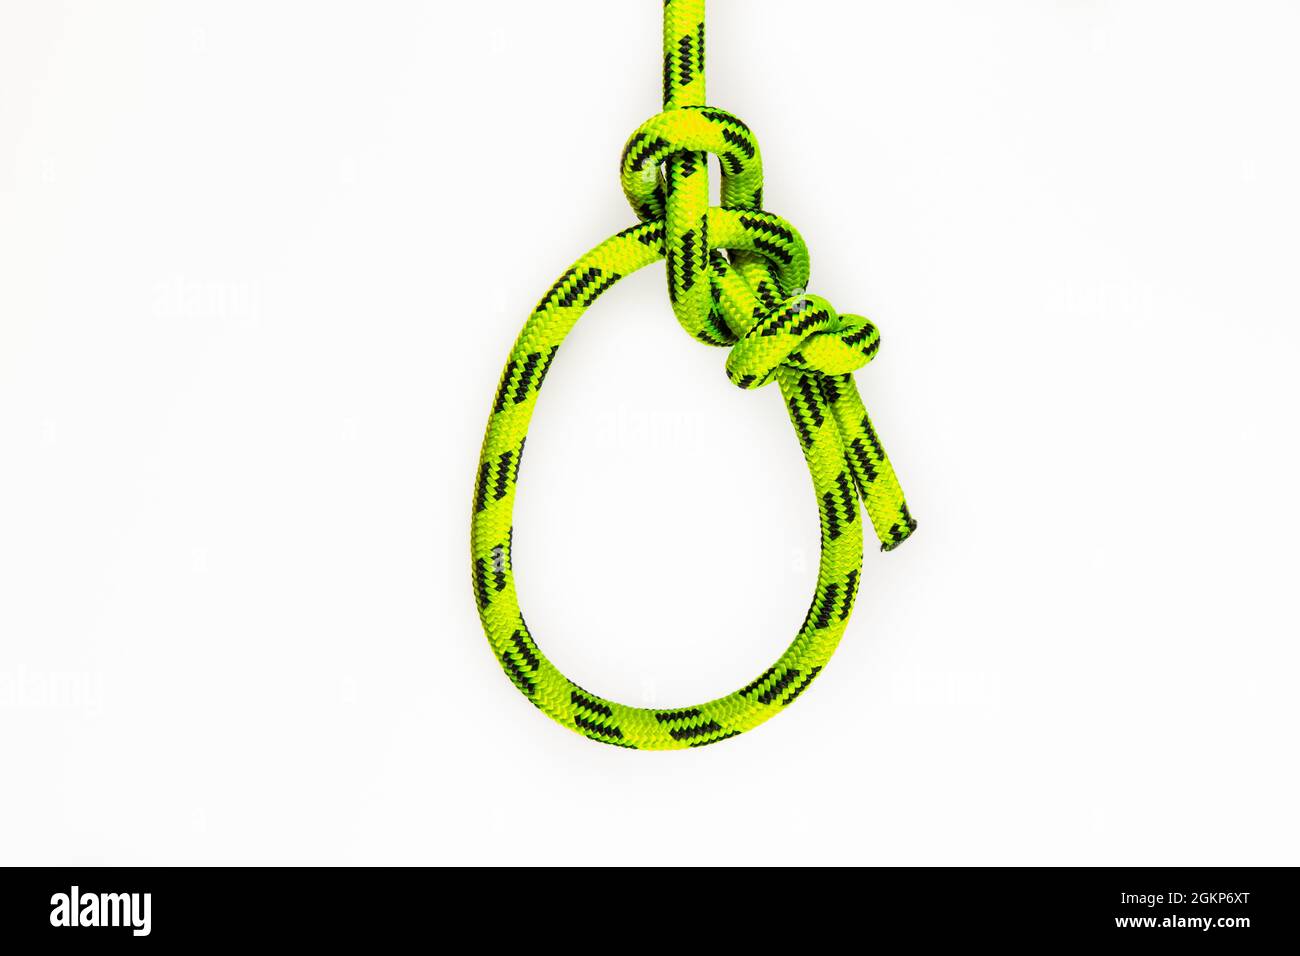 bowline. A knot of synthetic yellow rope Isolated on white background. The Bowline is an ancient and simple knot used to form a fixed loop at the end Stock Photo